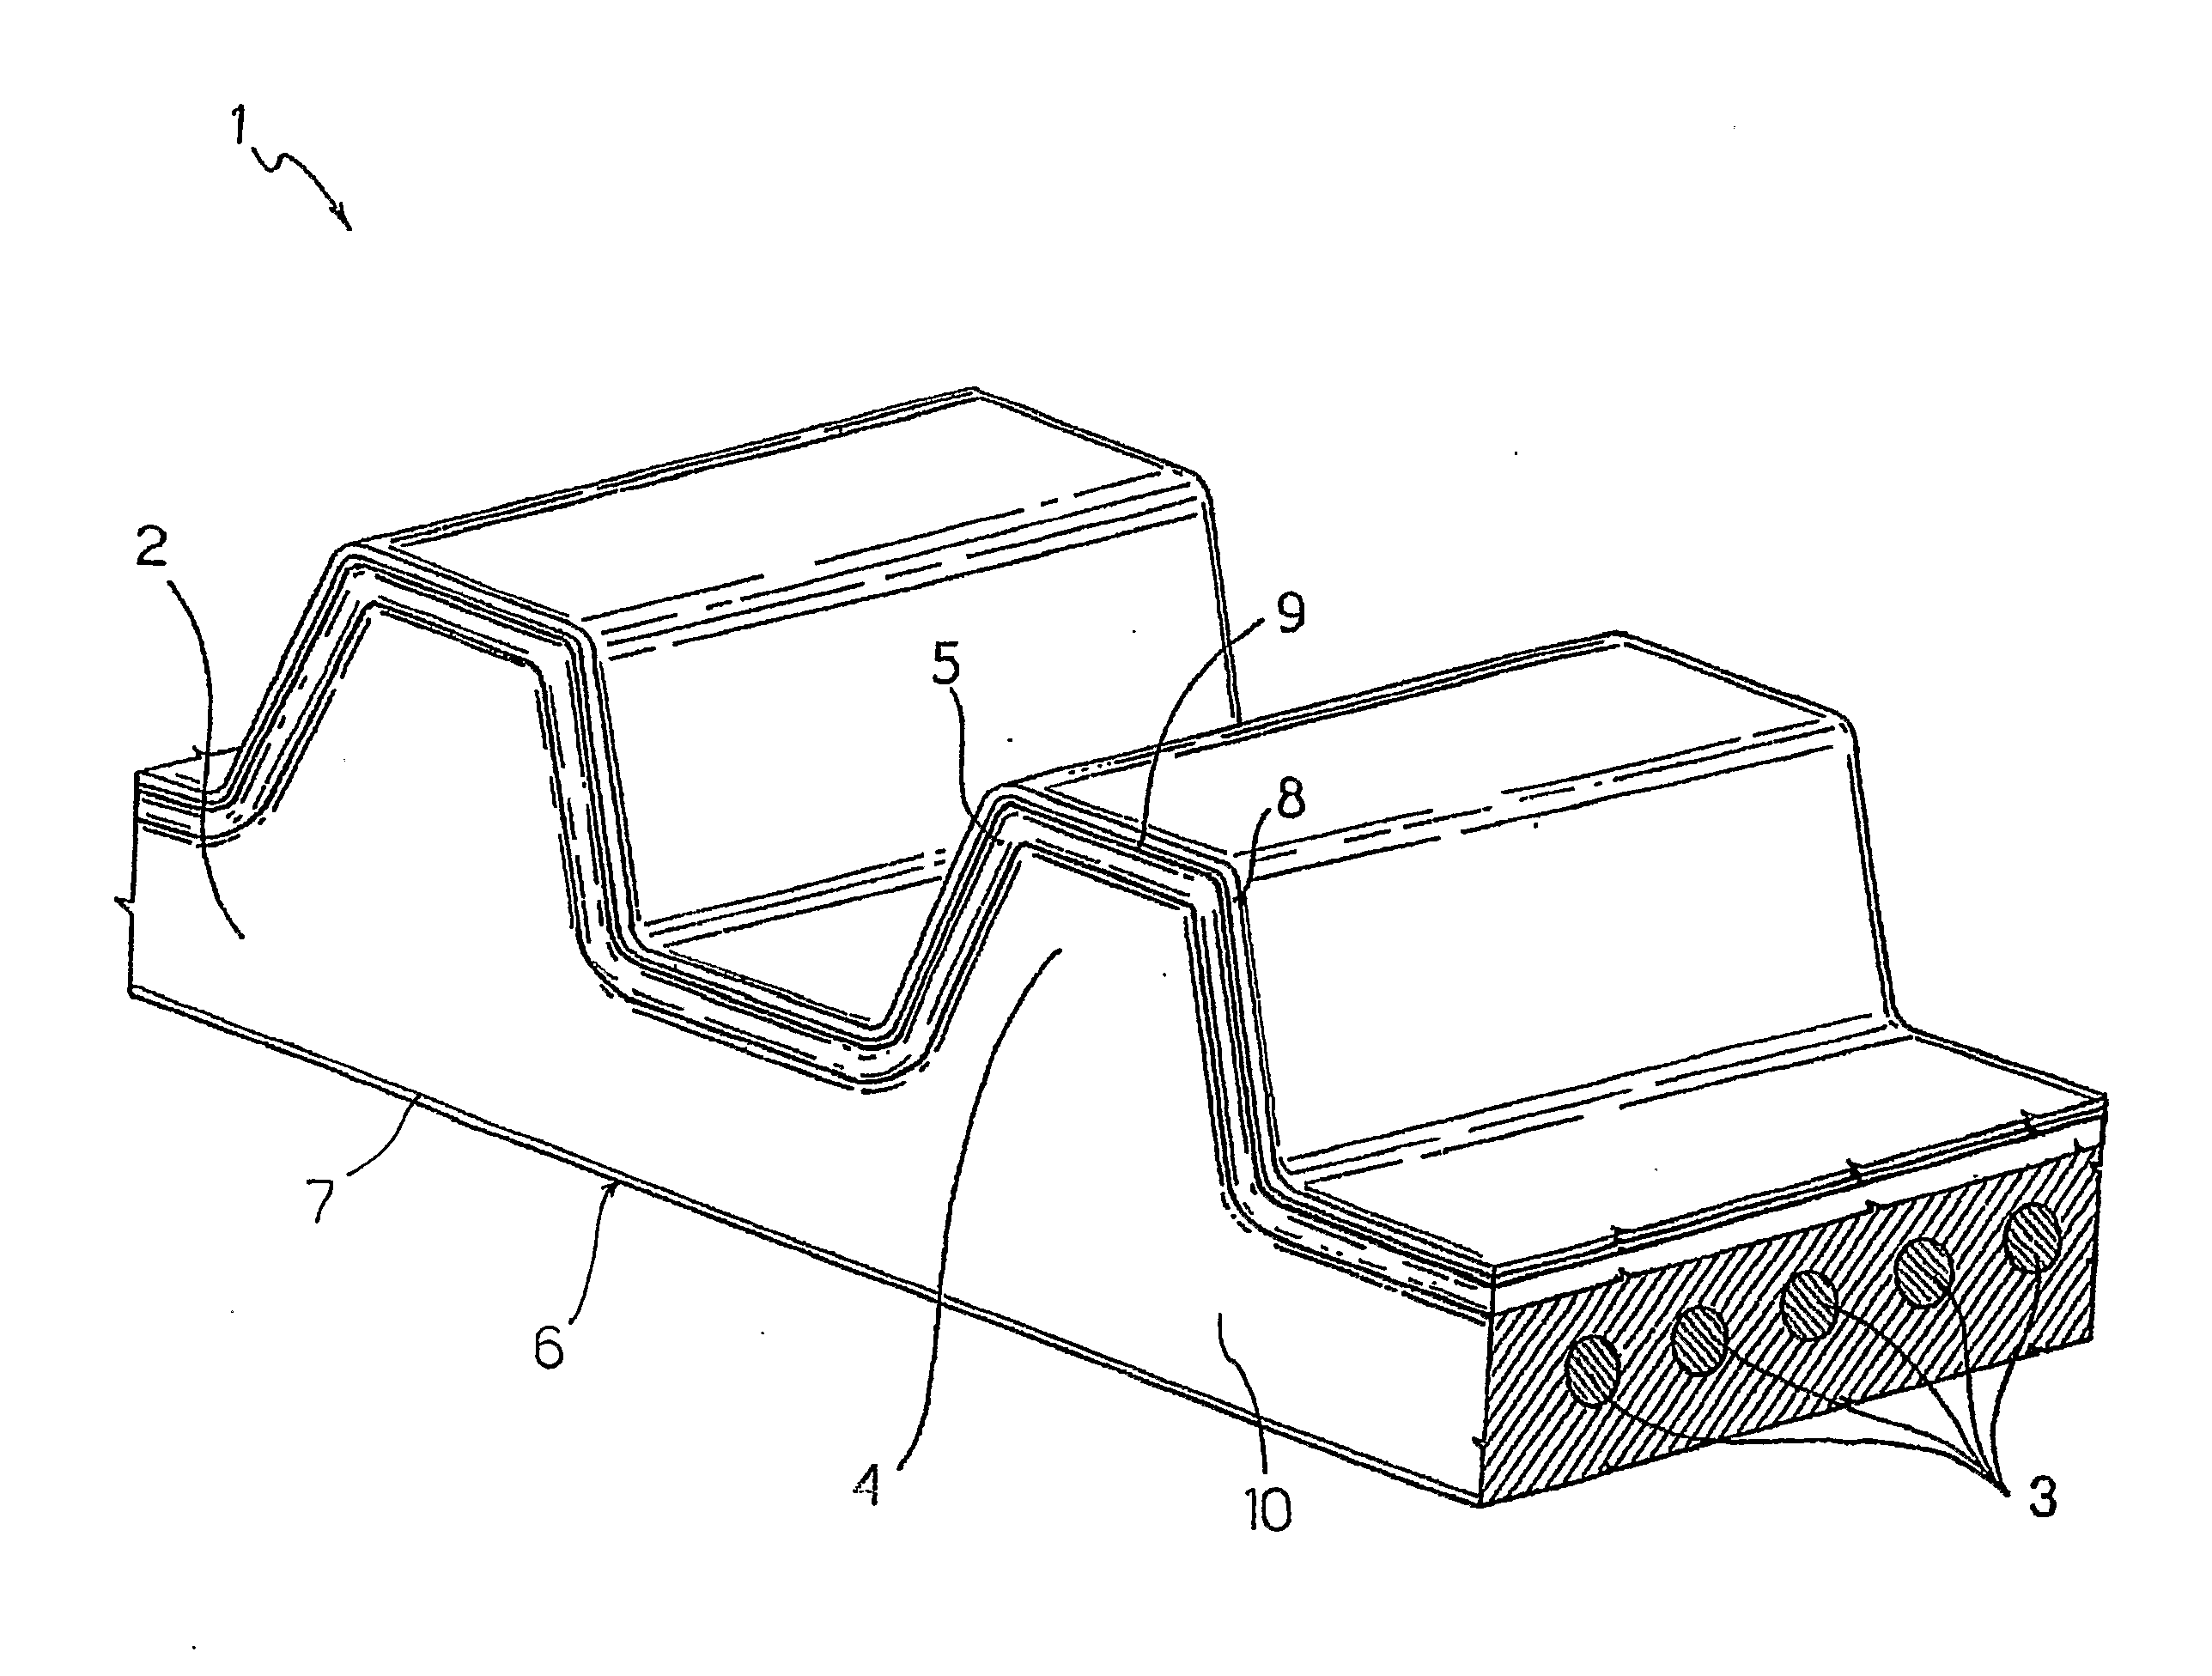 Toothed Belt for Use with Oil and Relative Timing Control System